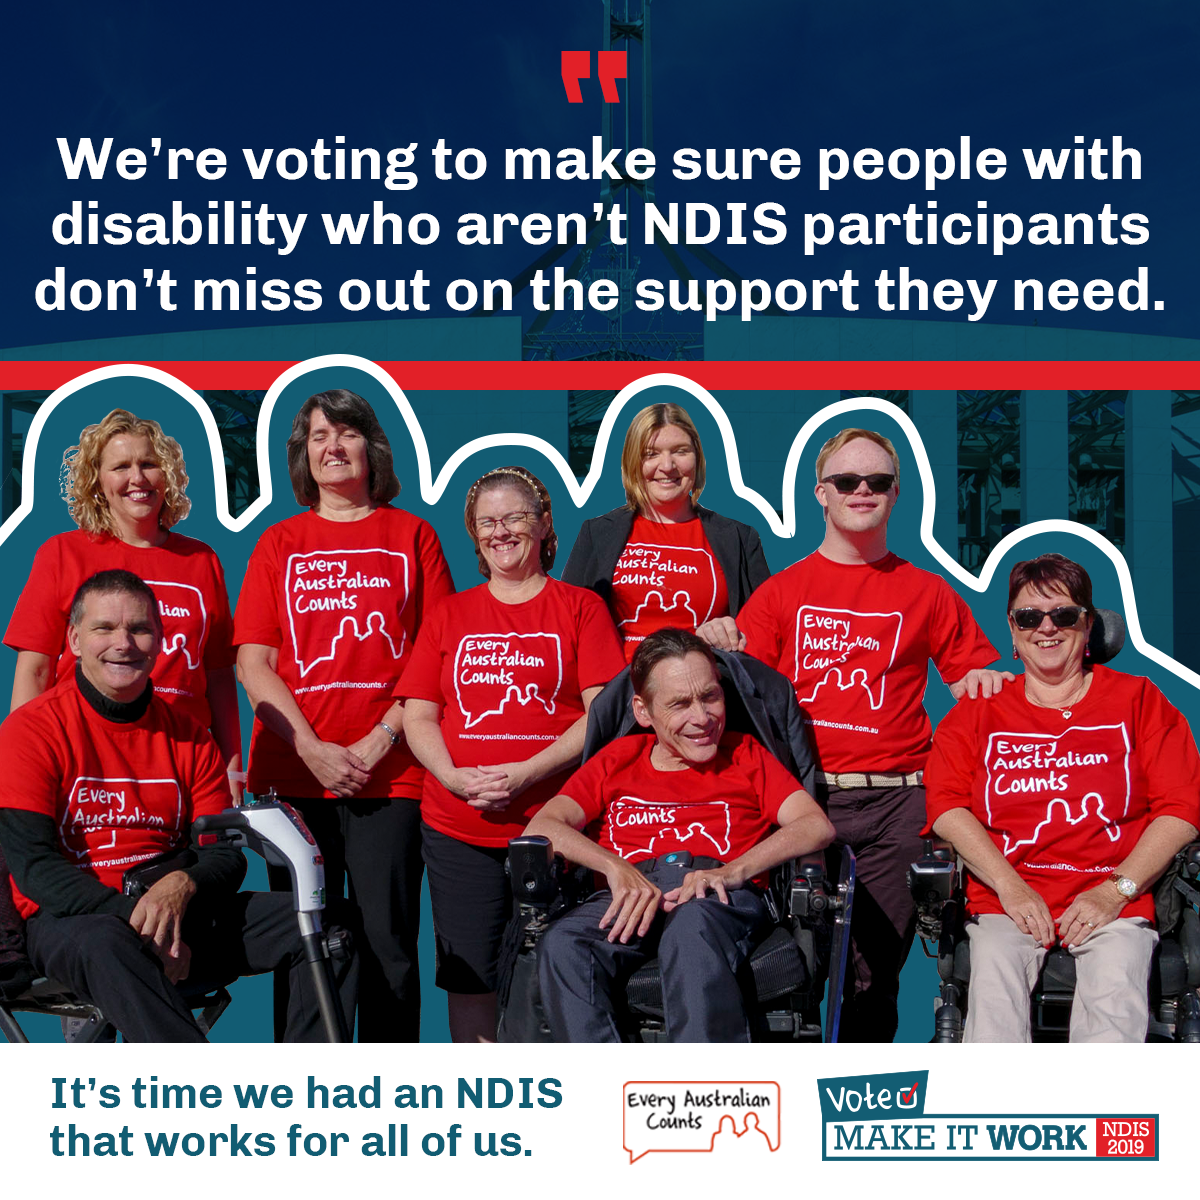 Sharegraphic - We're voting to make sure people with disability who aren't NDIS participants don't miss out on the support they need